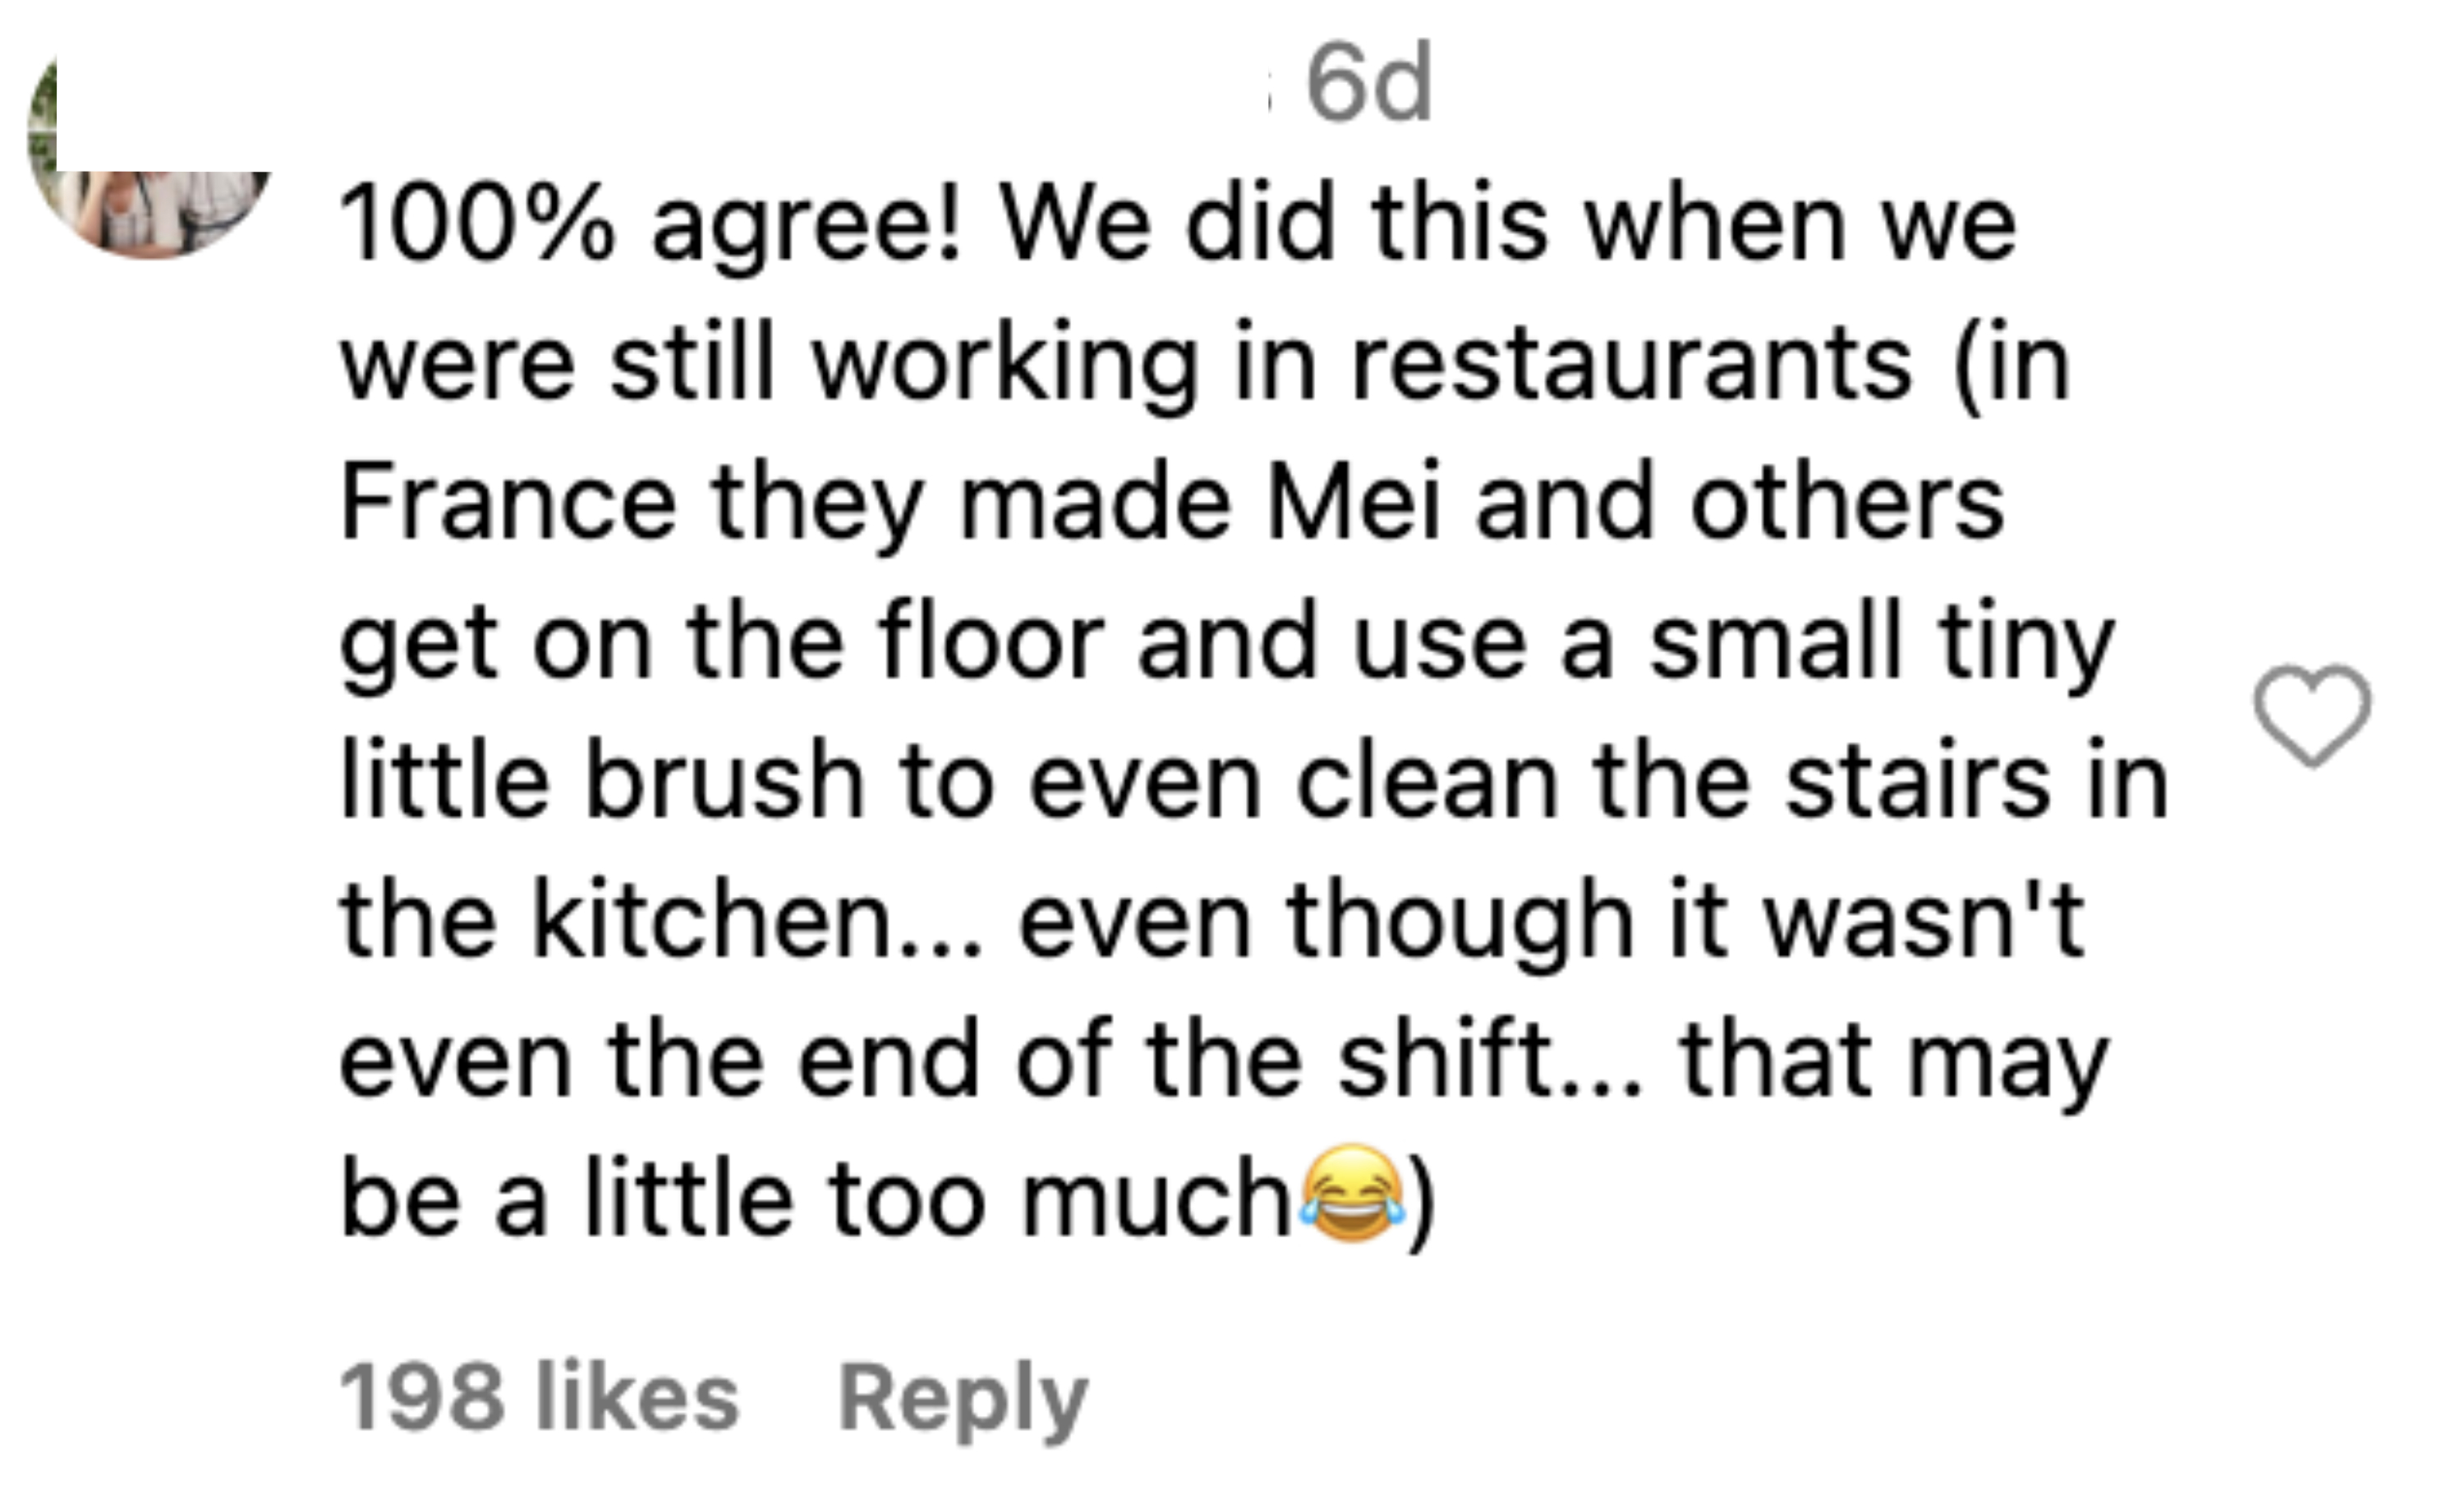 A comment by two_plaid_aprons stating that in France, restaurant staff, including Mei, had to use a small brush to clean stairs while still on shift. The commenter agrees it was excessive